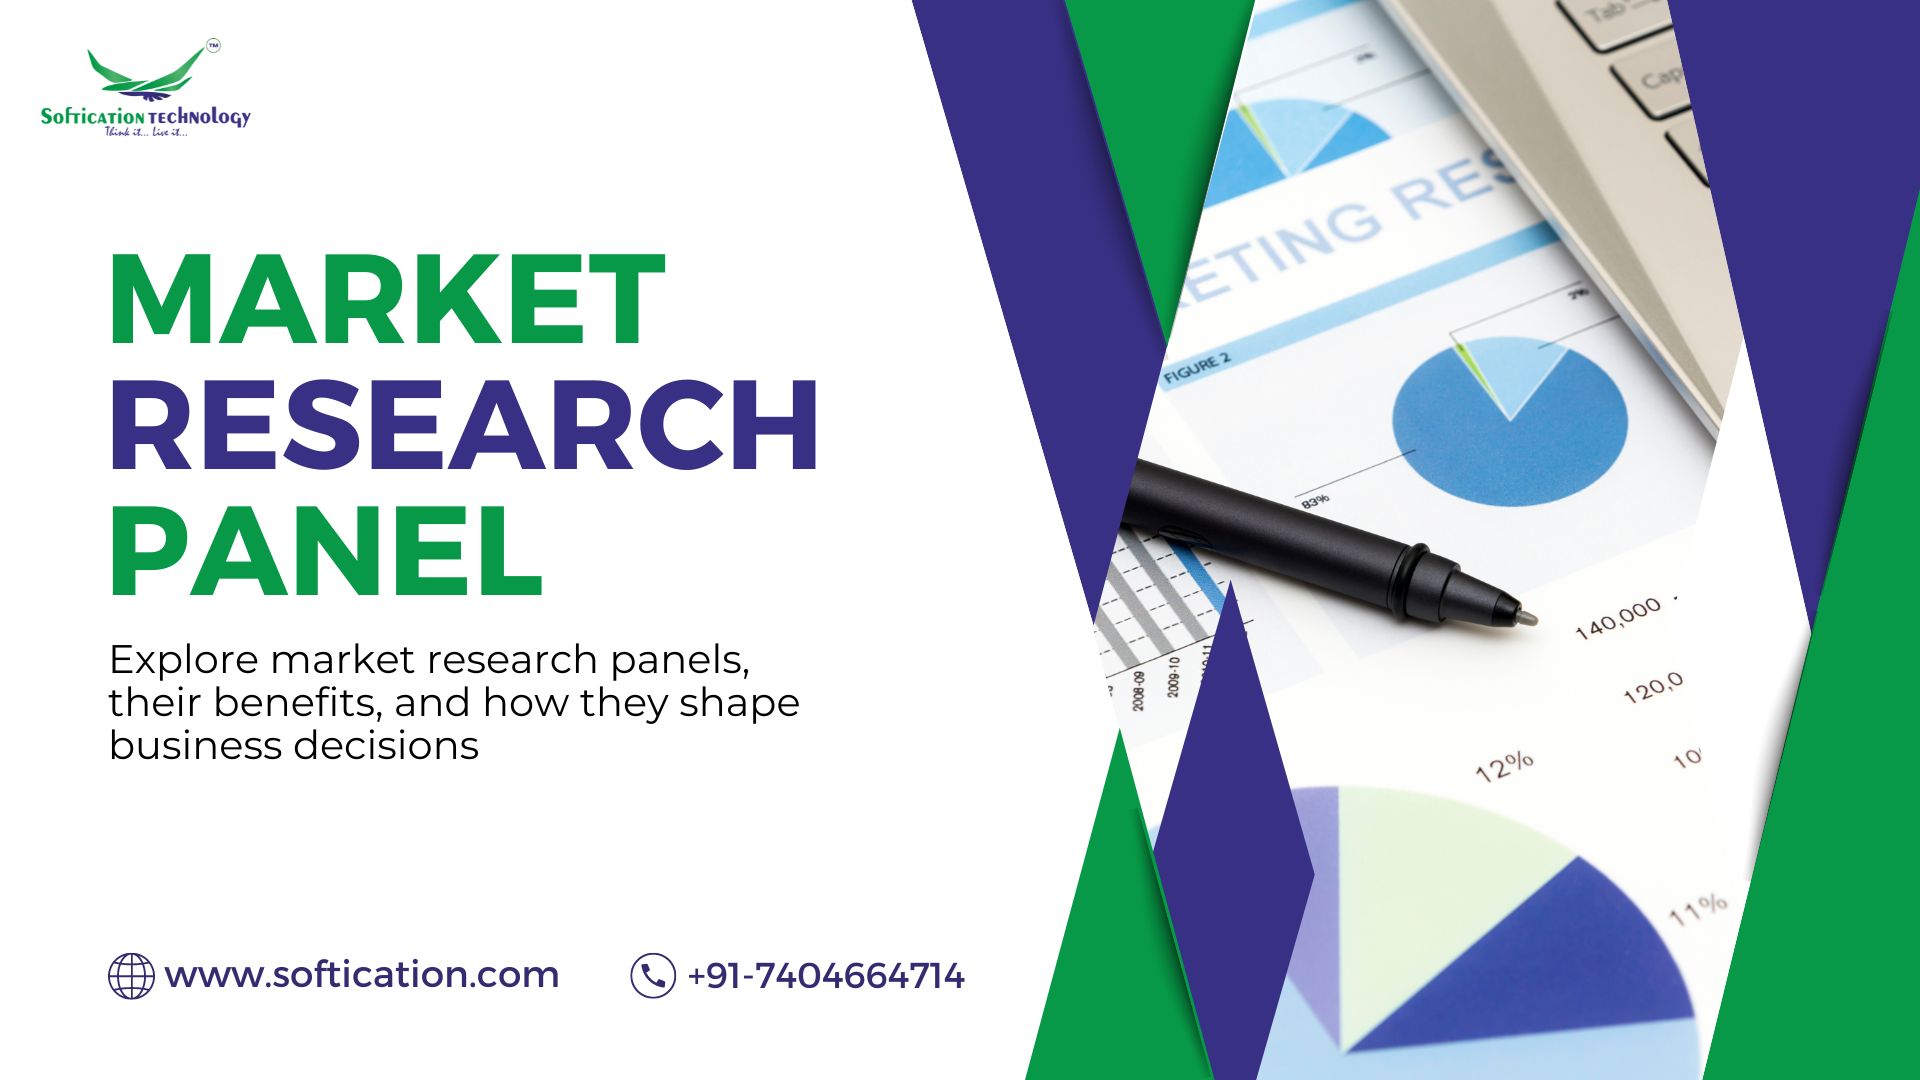 Explore market research panels, their benefits, and how they shape business decisions.